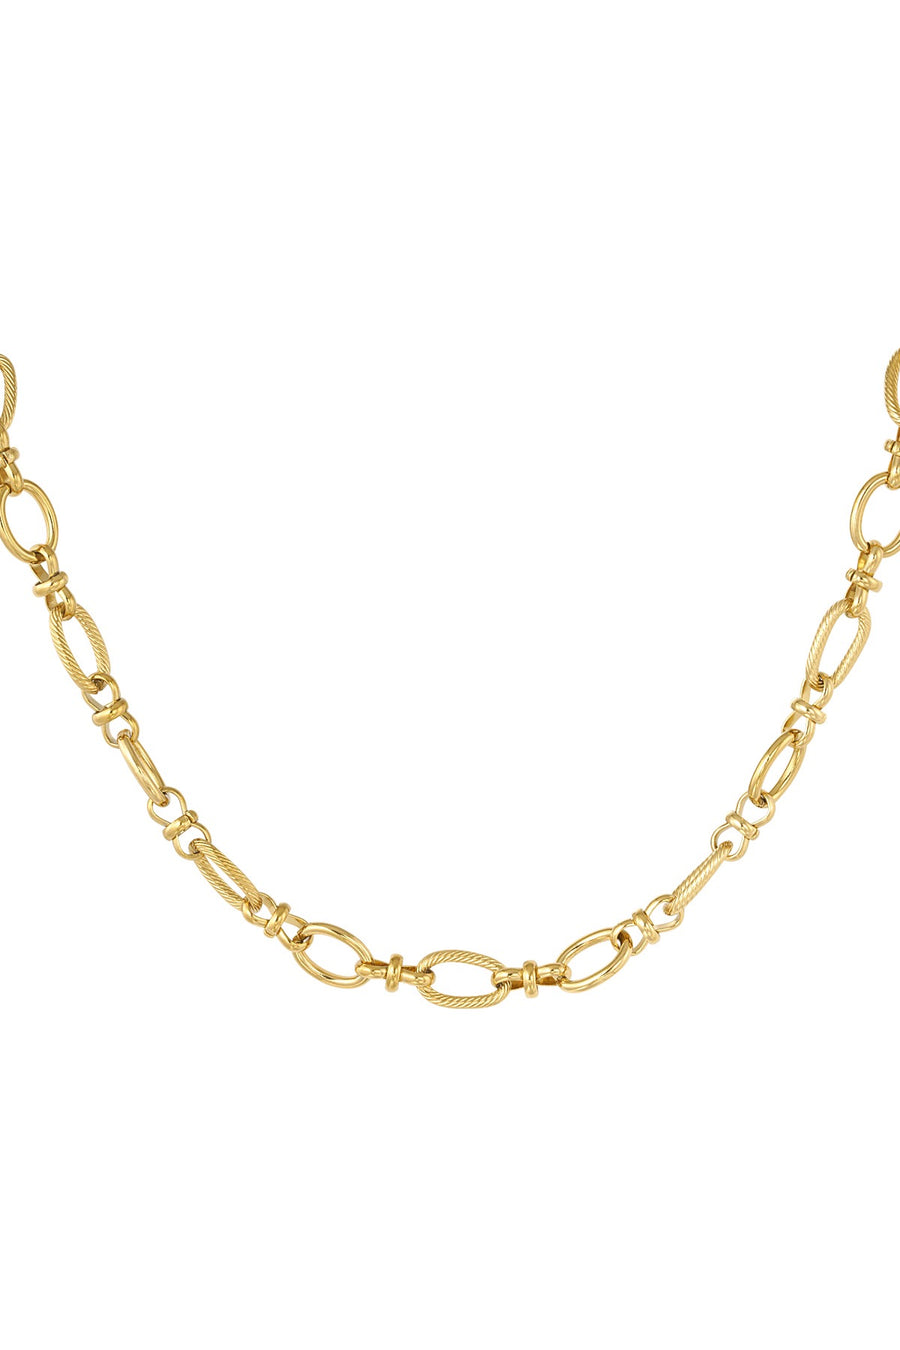 Link Chain - Gold & Silver Available